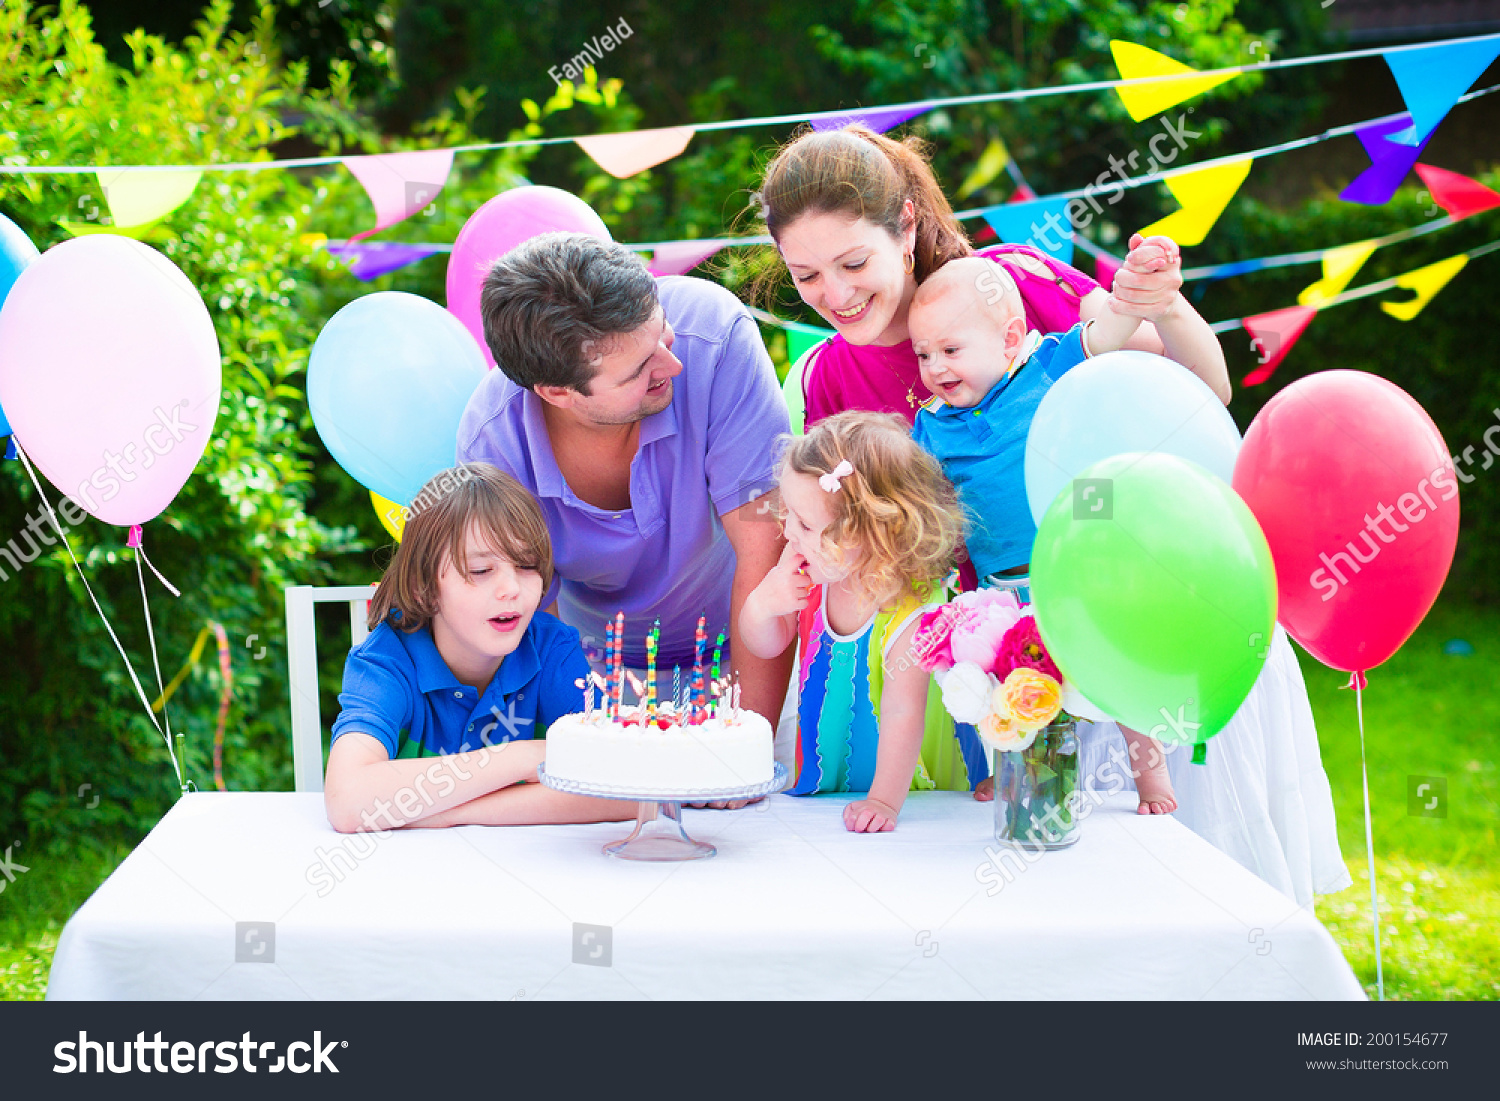 Happy big family with three kids - school age boy, toddler girl and a little baby enjoying birthday party with a cake blowing candles in a summer garden decorated with balloons and banners #200154677